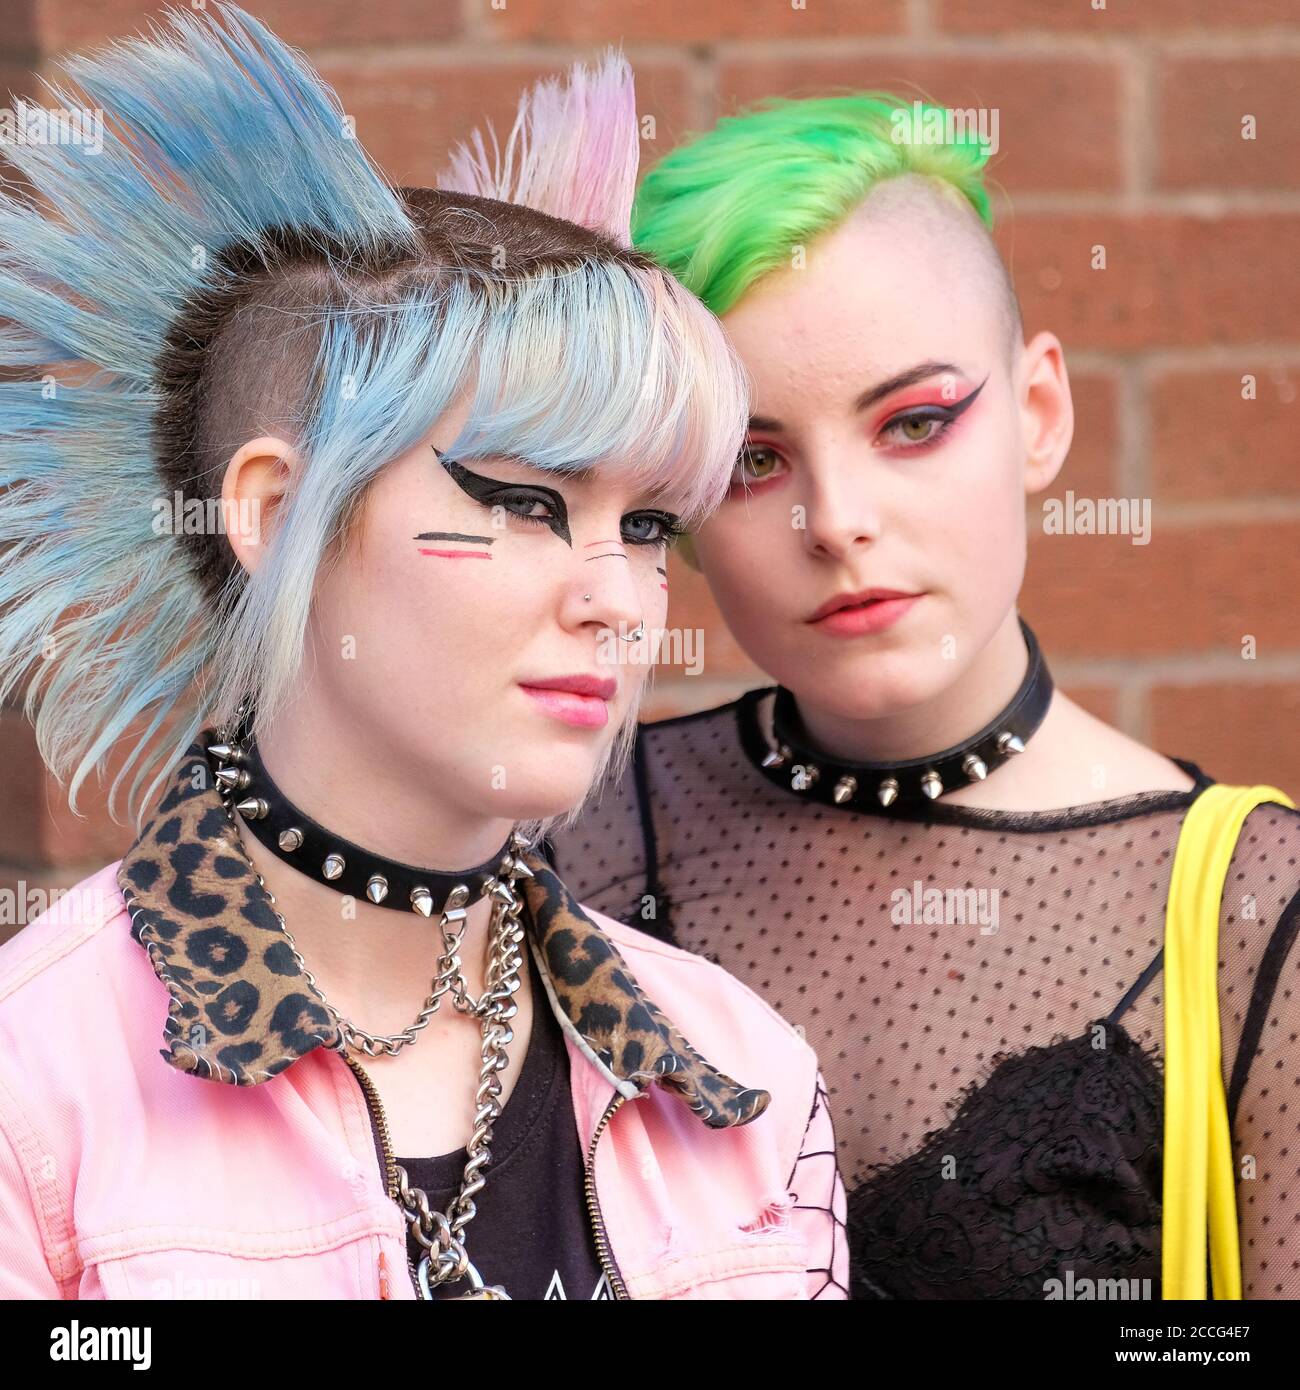 2 beautiful punk girls with studded collars, vivid hair styles and dramatic makeup Stock Photo